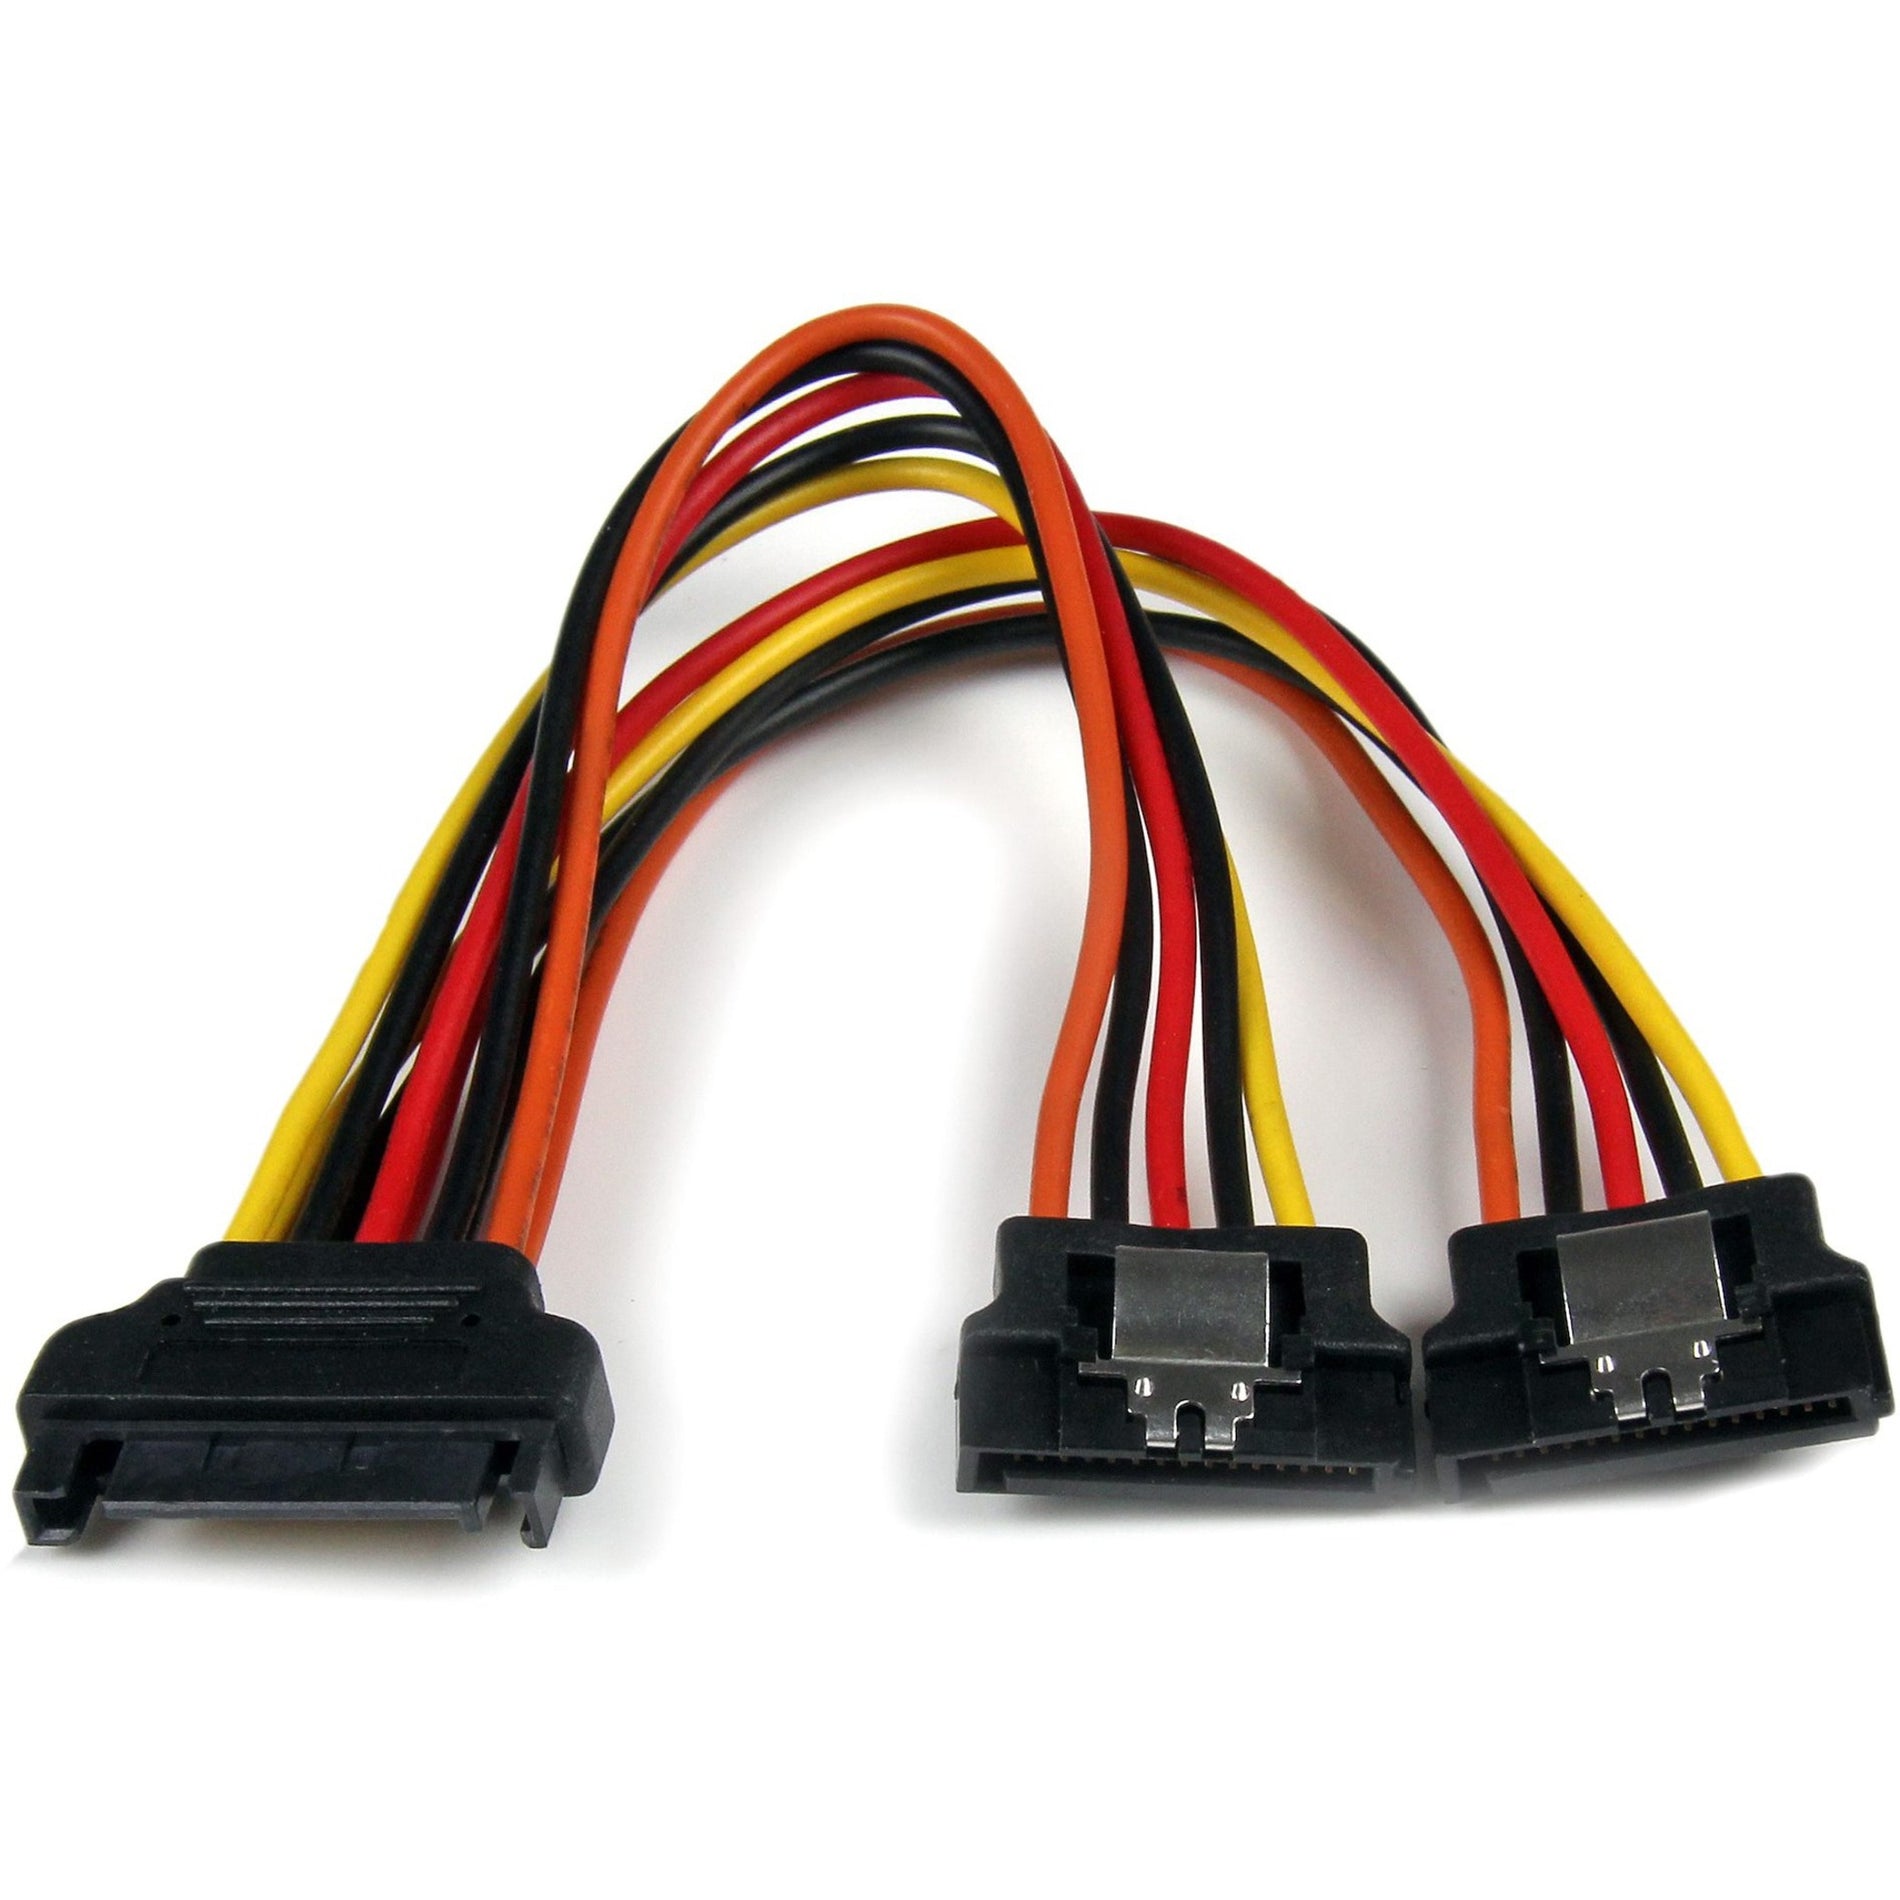 StarTech.com PYO2LSATA 6in Latching SATA Power Y Splitter Cable Adapter - M/F, Lifetime Warranty, RoHS Certified